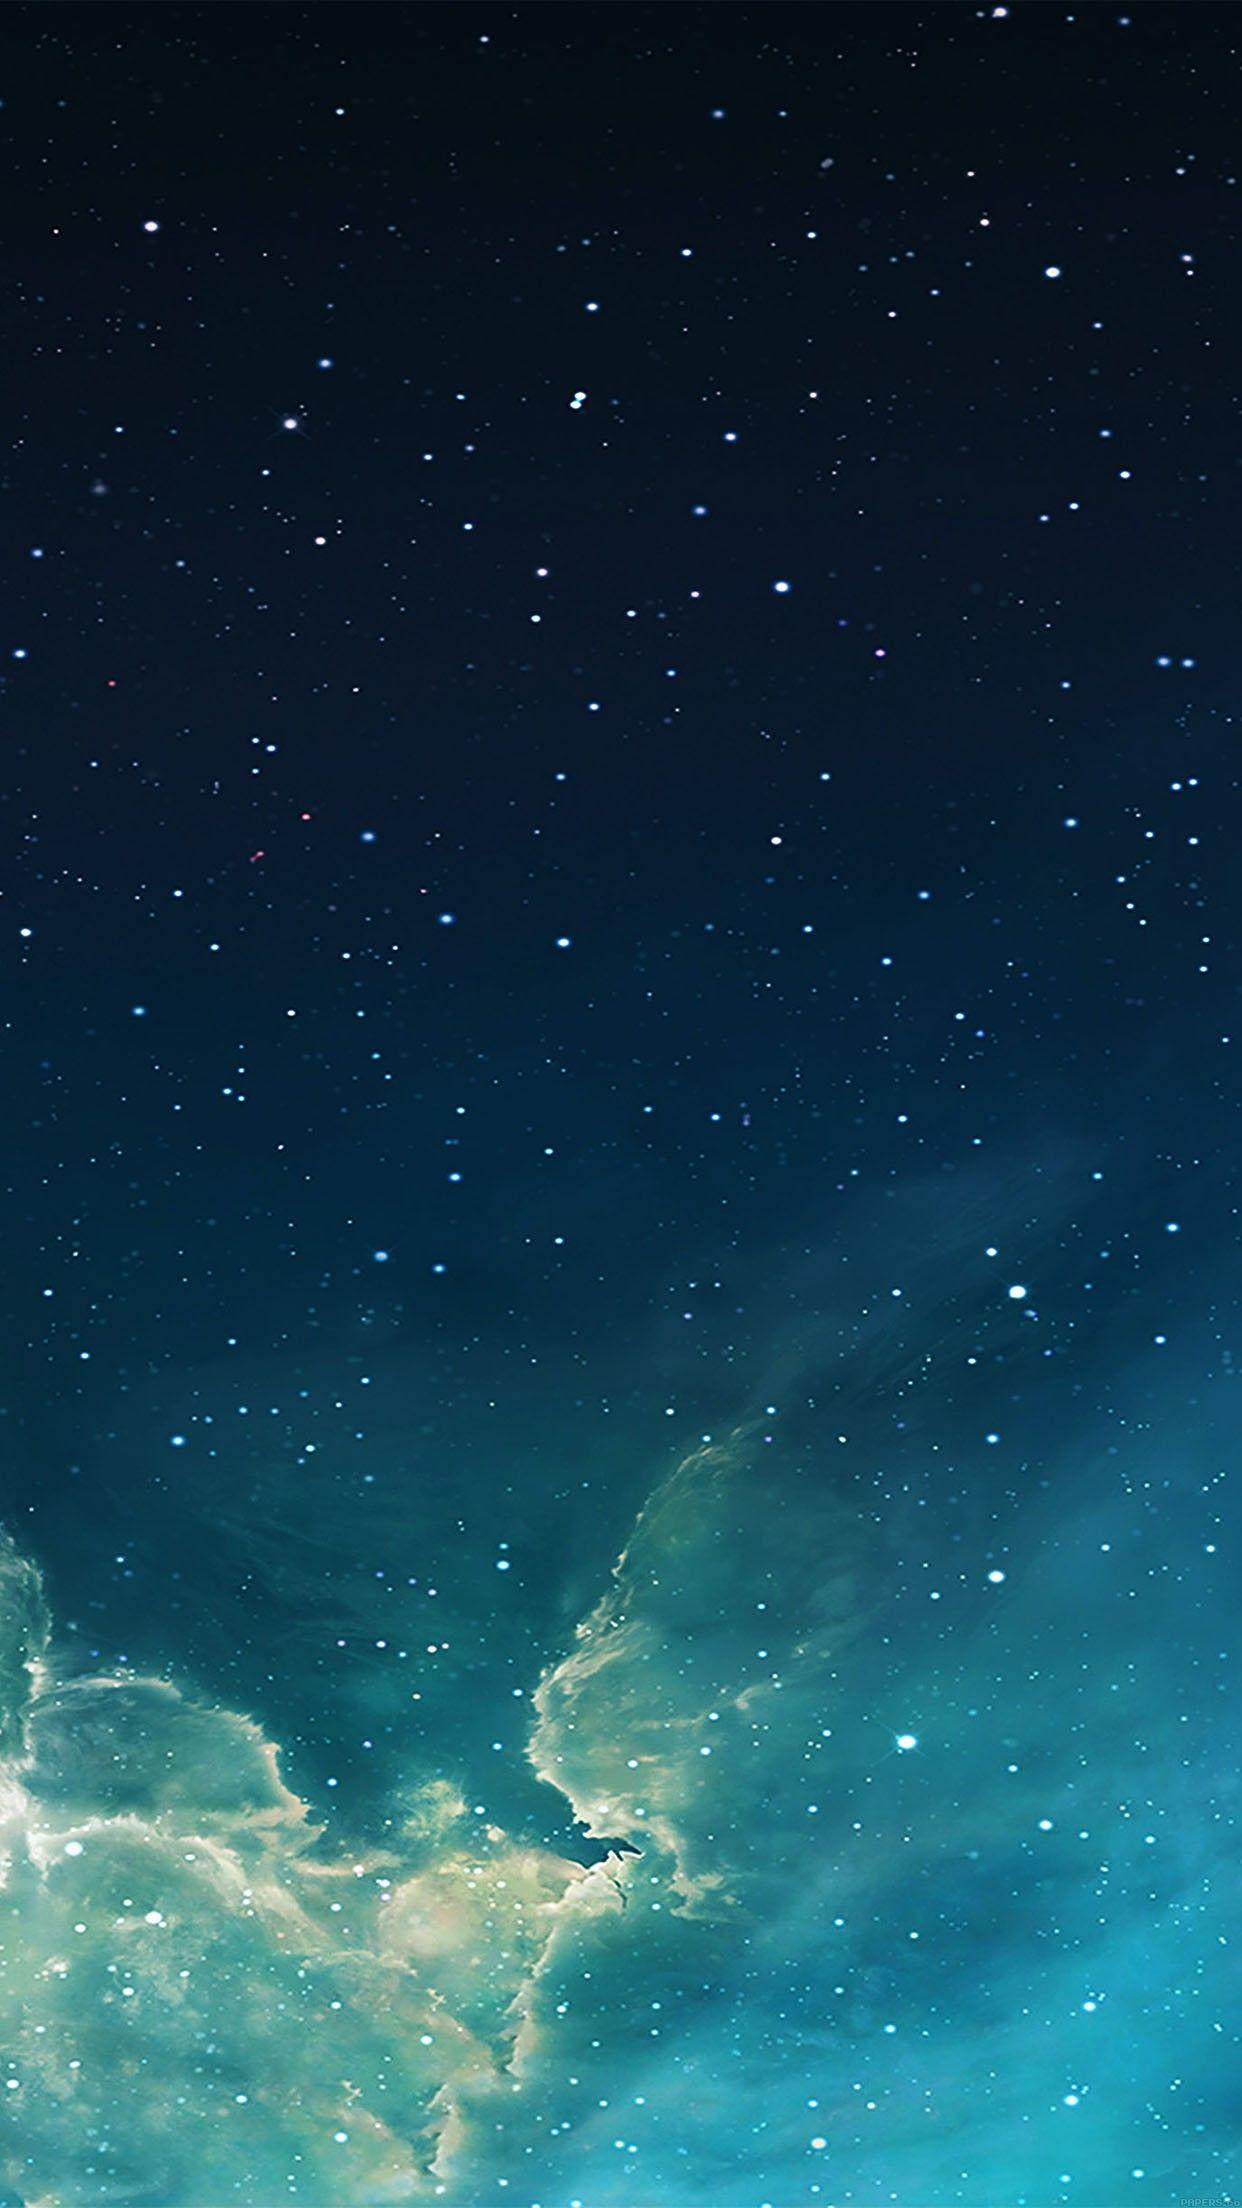 Wallpapers galaxy blue starry star sky iphone plus wallpapers